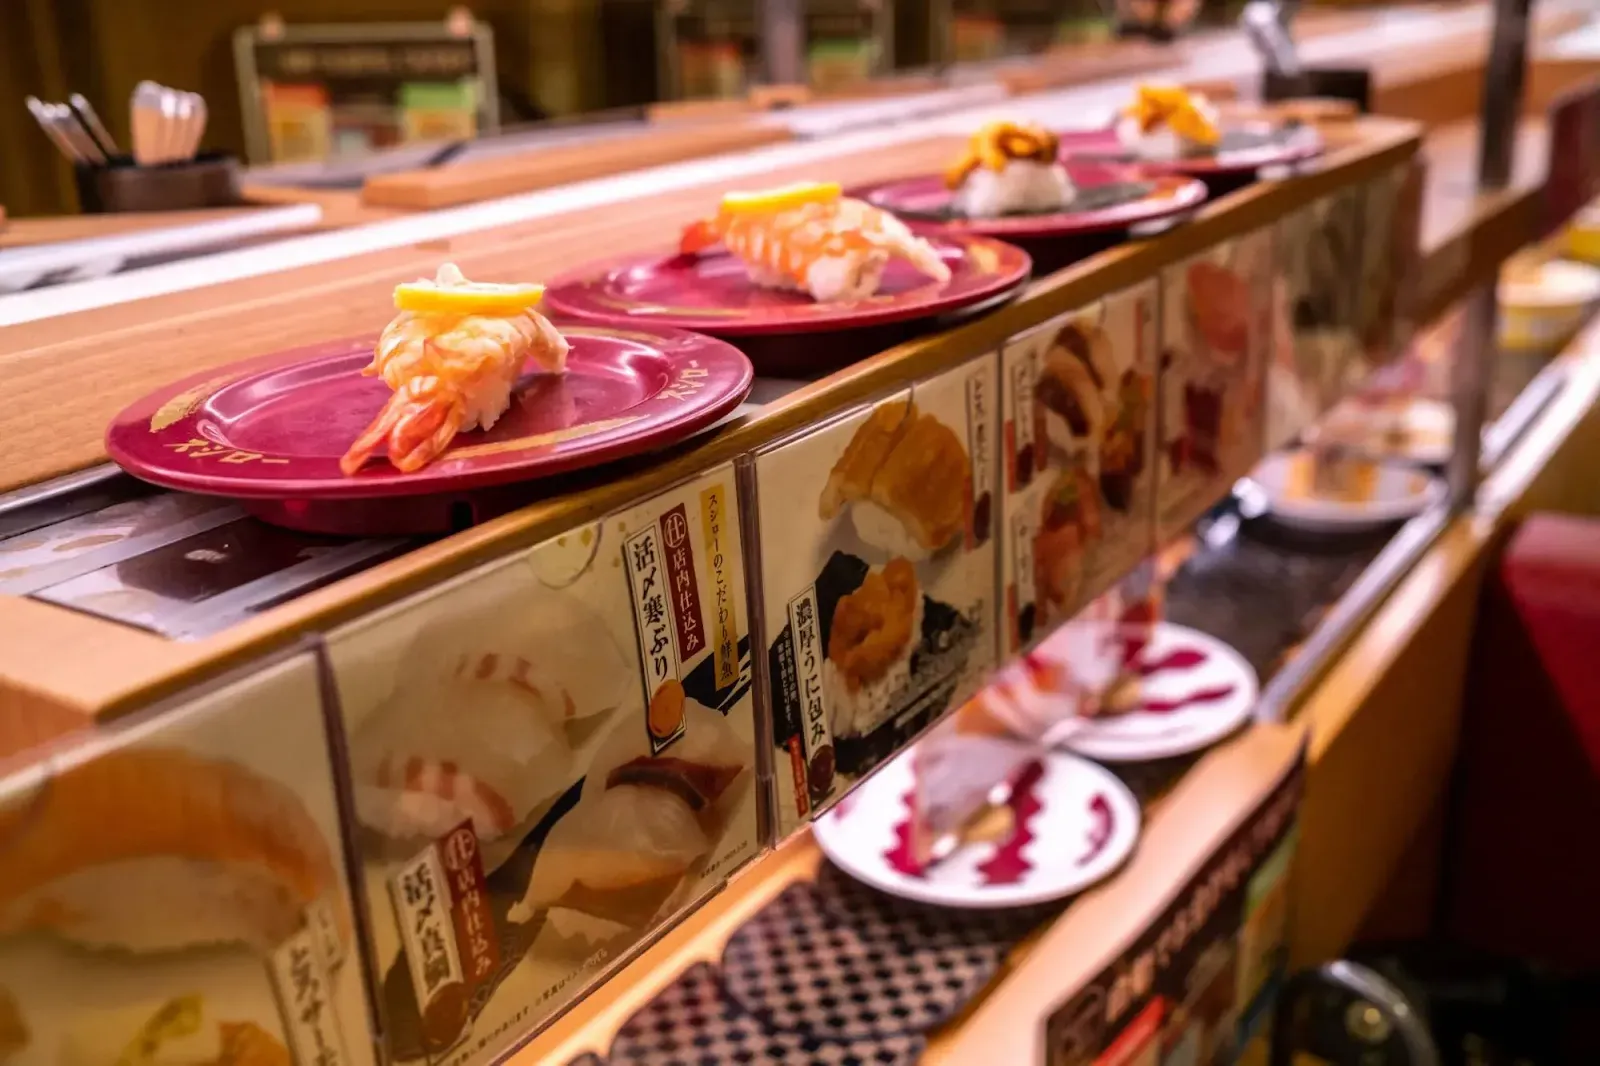 Teen sued by Japanese sushi establishment for soy sauce prank for RM2.21 million